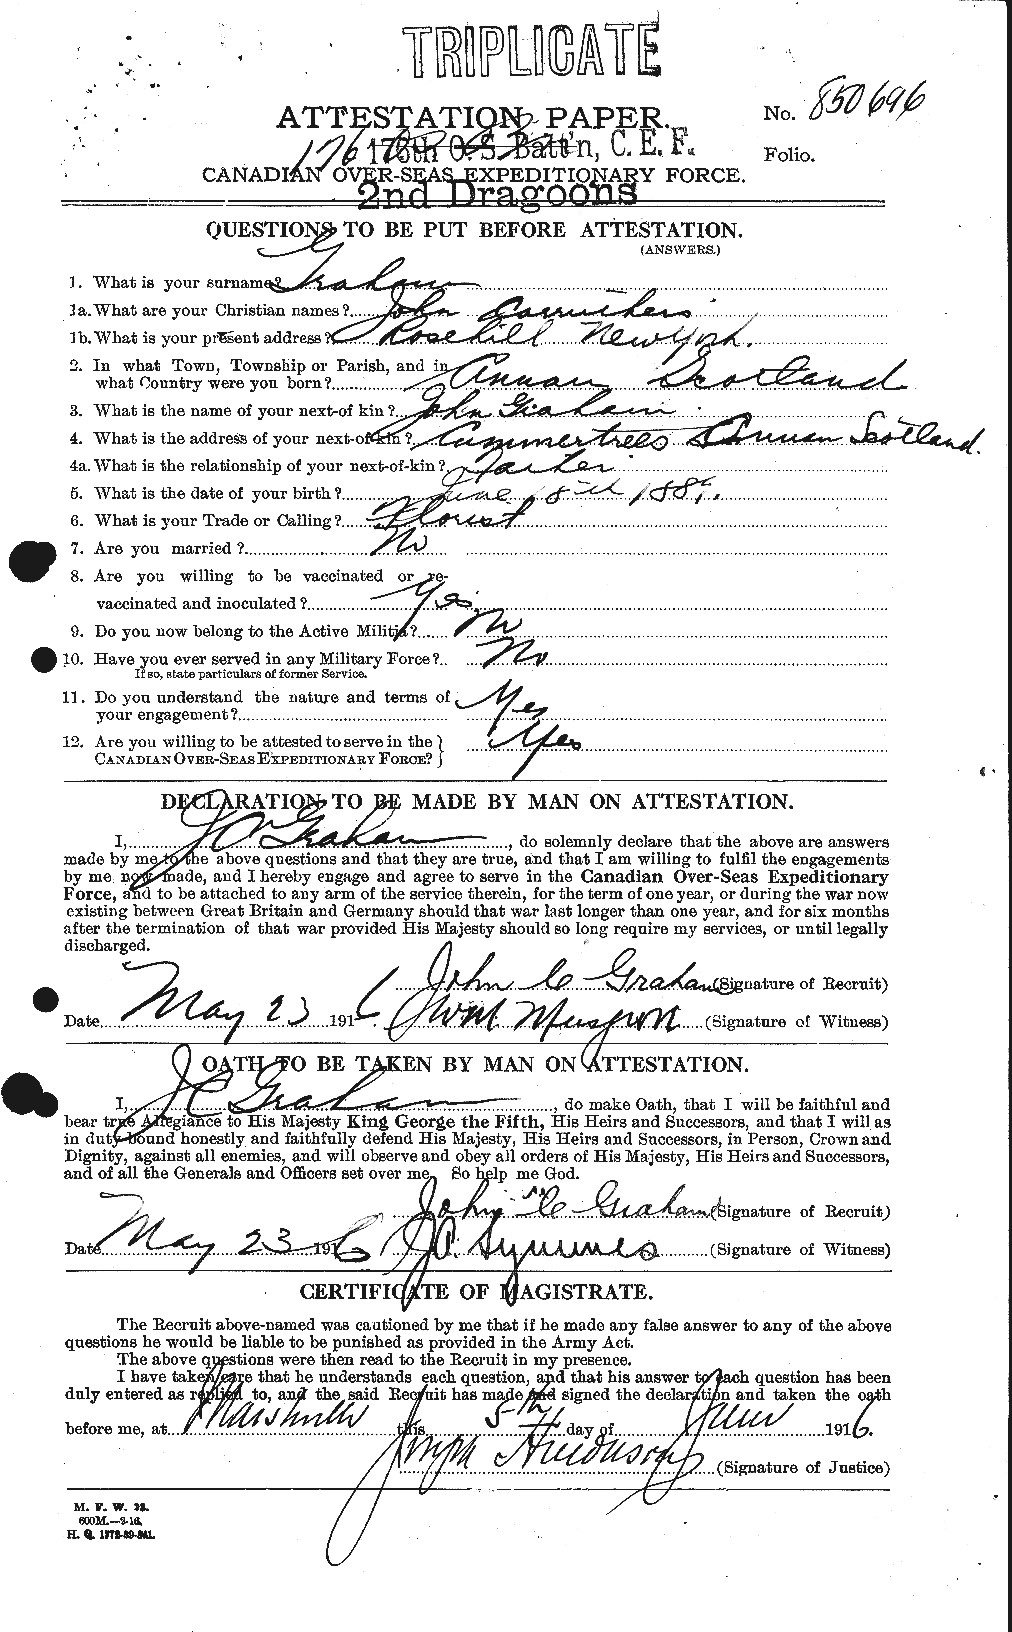 Personnel Records of the First World War - CEF 359160a